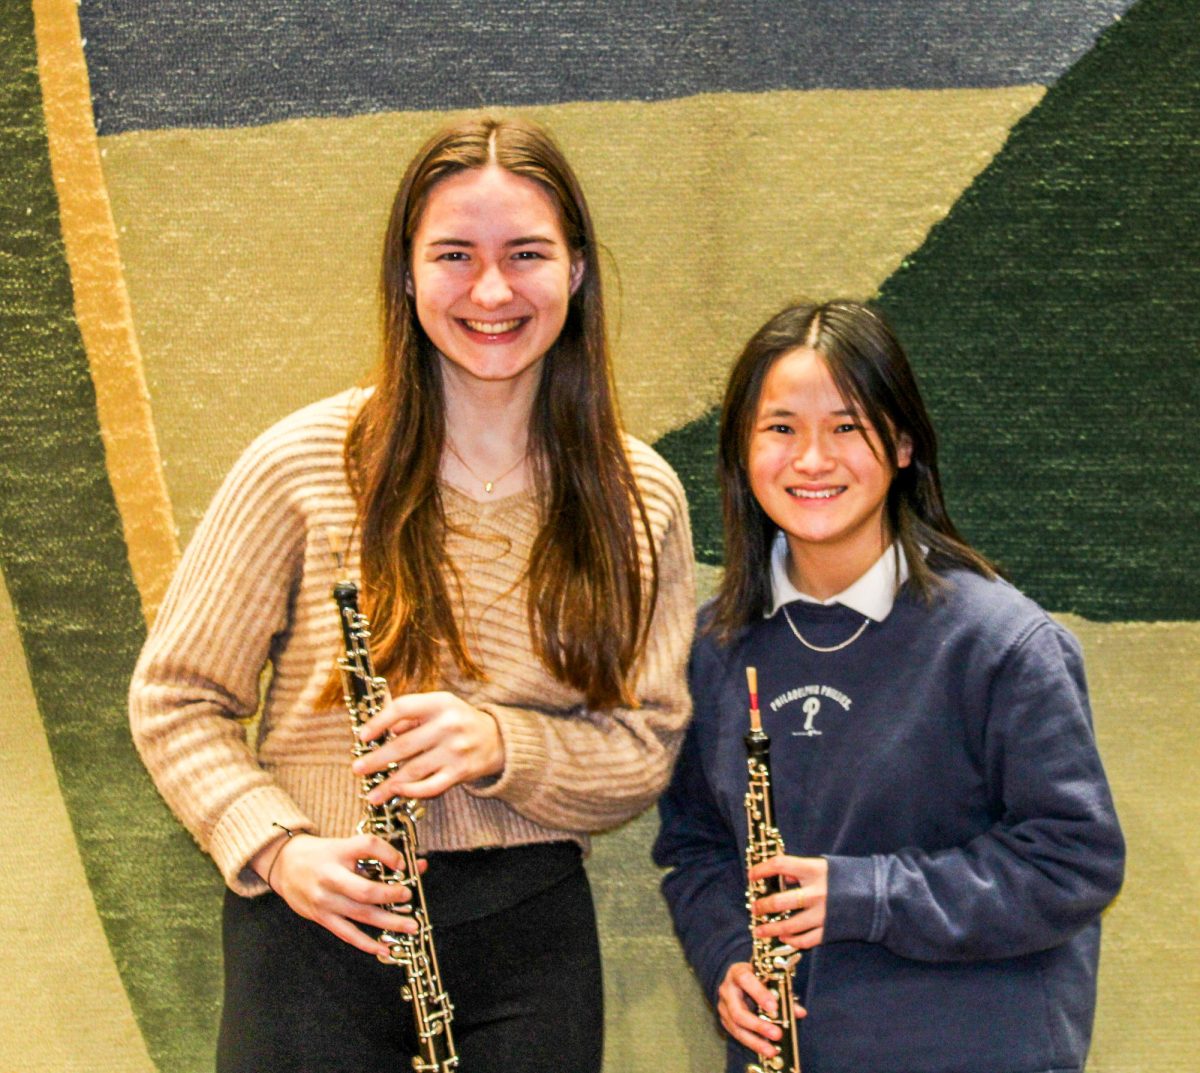 Olivia Hofmann 24 and Olivia Bamford 24 both transitioned from violin to oboe before high school.